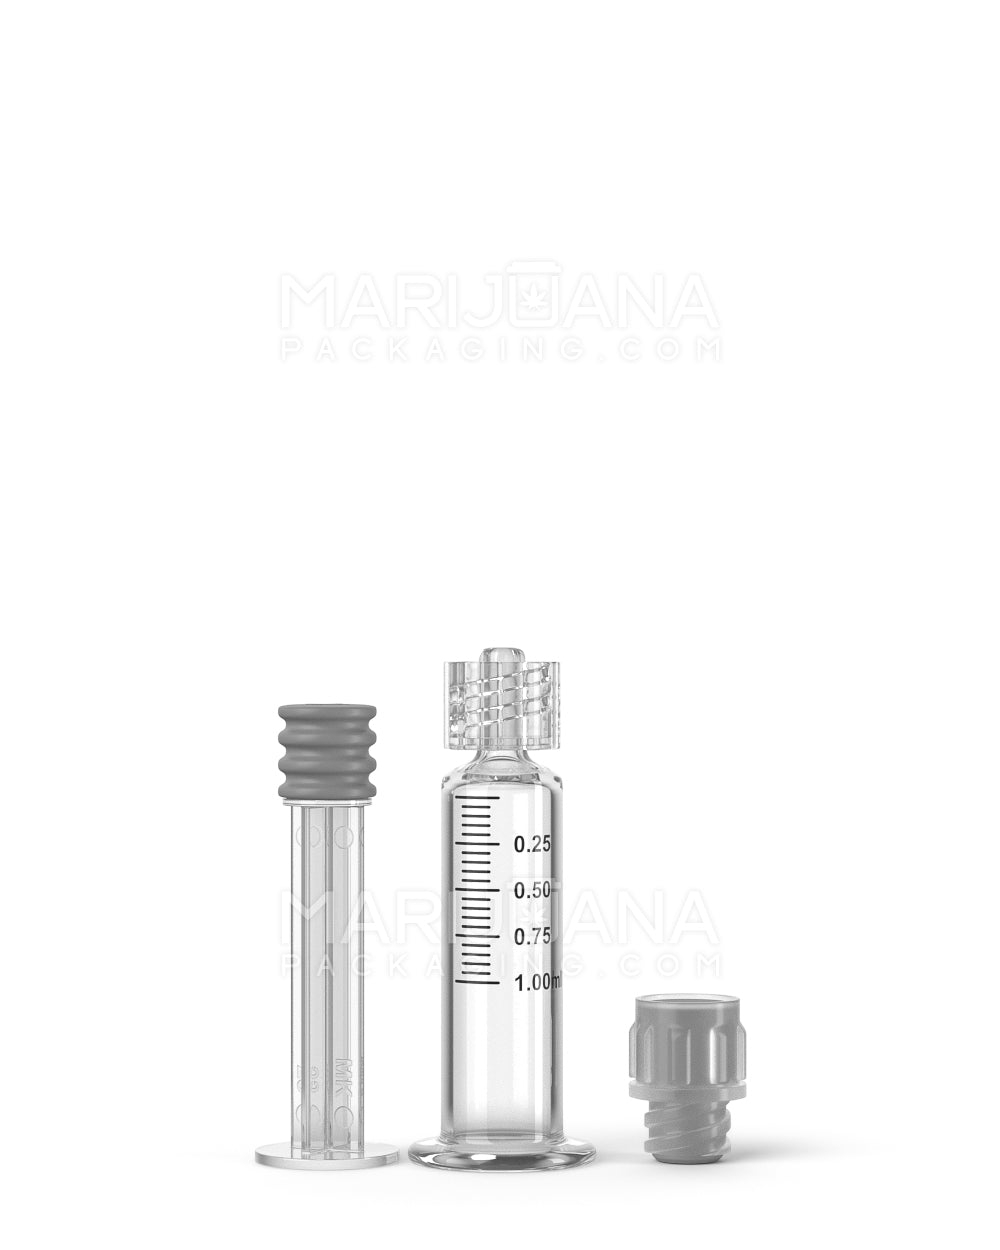 Luer Lock | Glass Dab Applicator Syringes | 1mL - 0.25mL Increments - 100 Count - 3